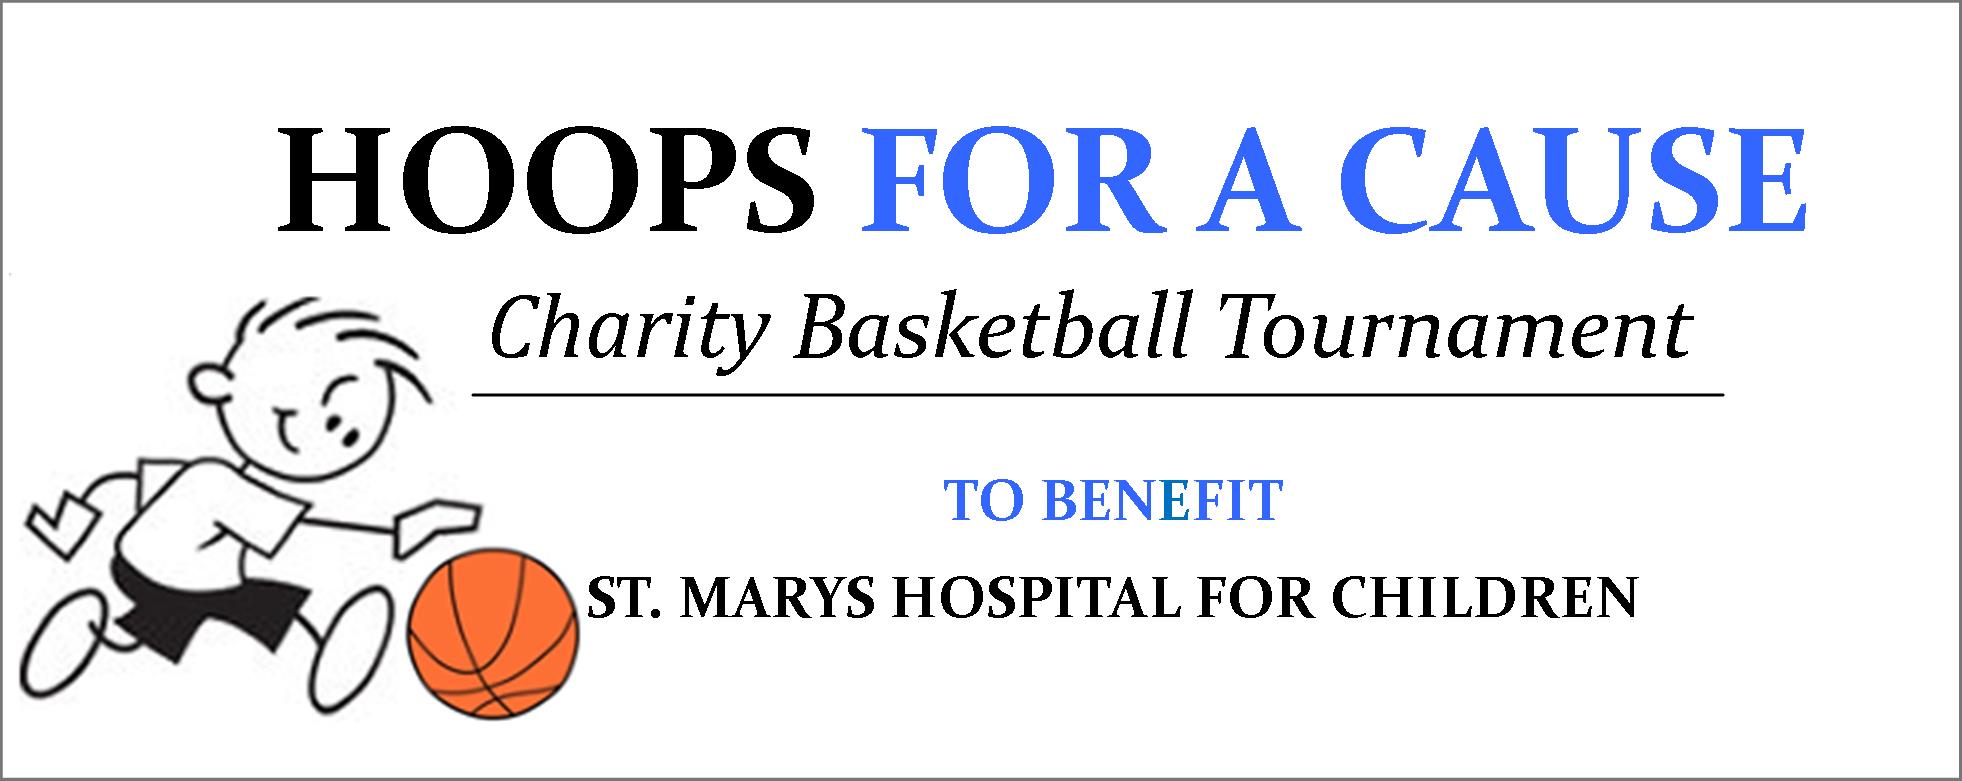 Hoops for a Cause